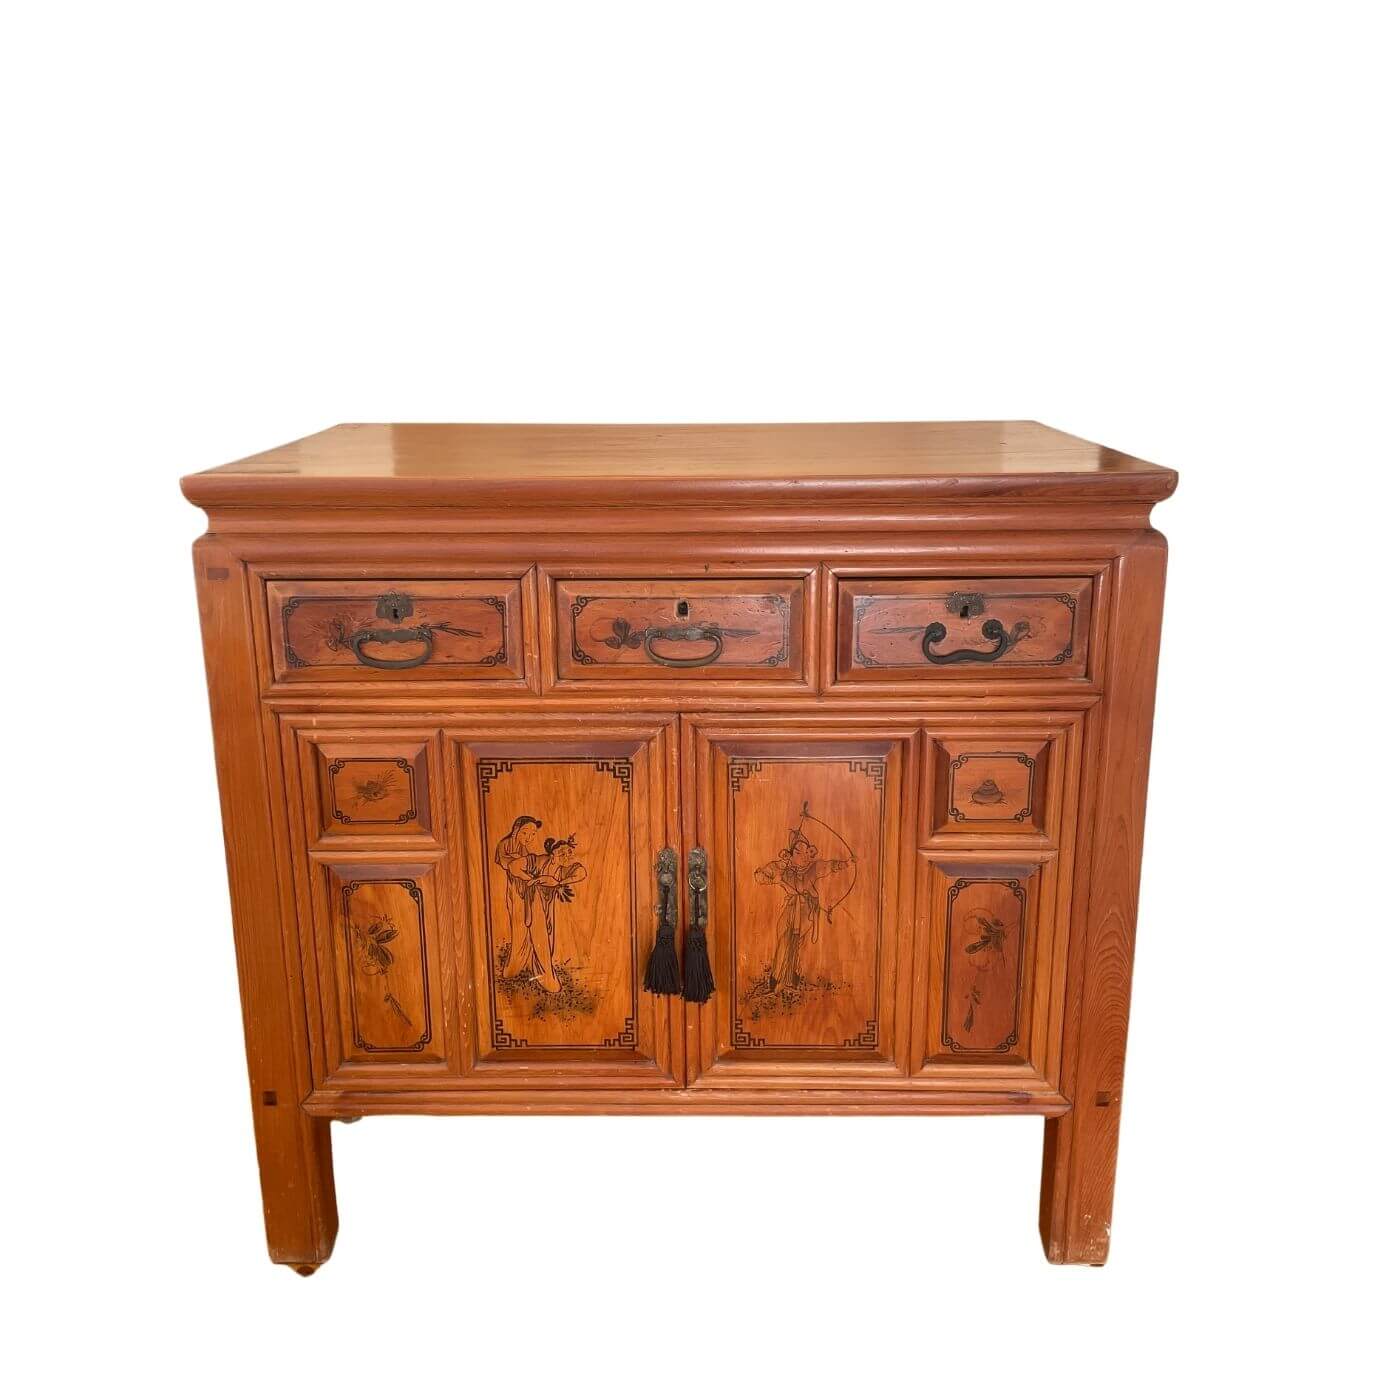 Chinese cabinet with chinoiserie painted details